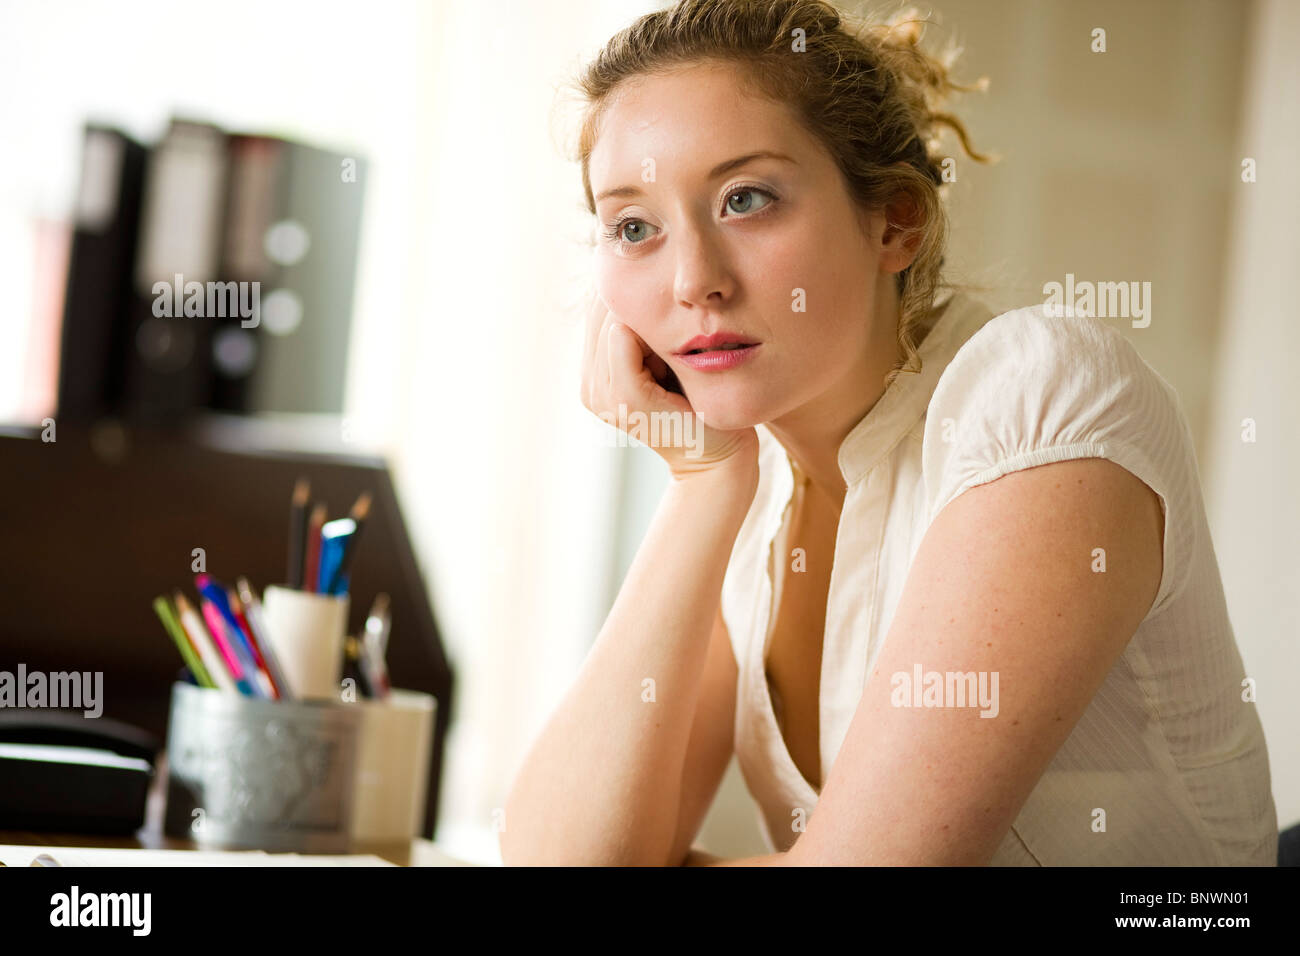 Woman in office bored Stock Photo